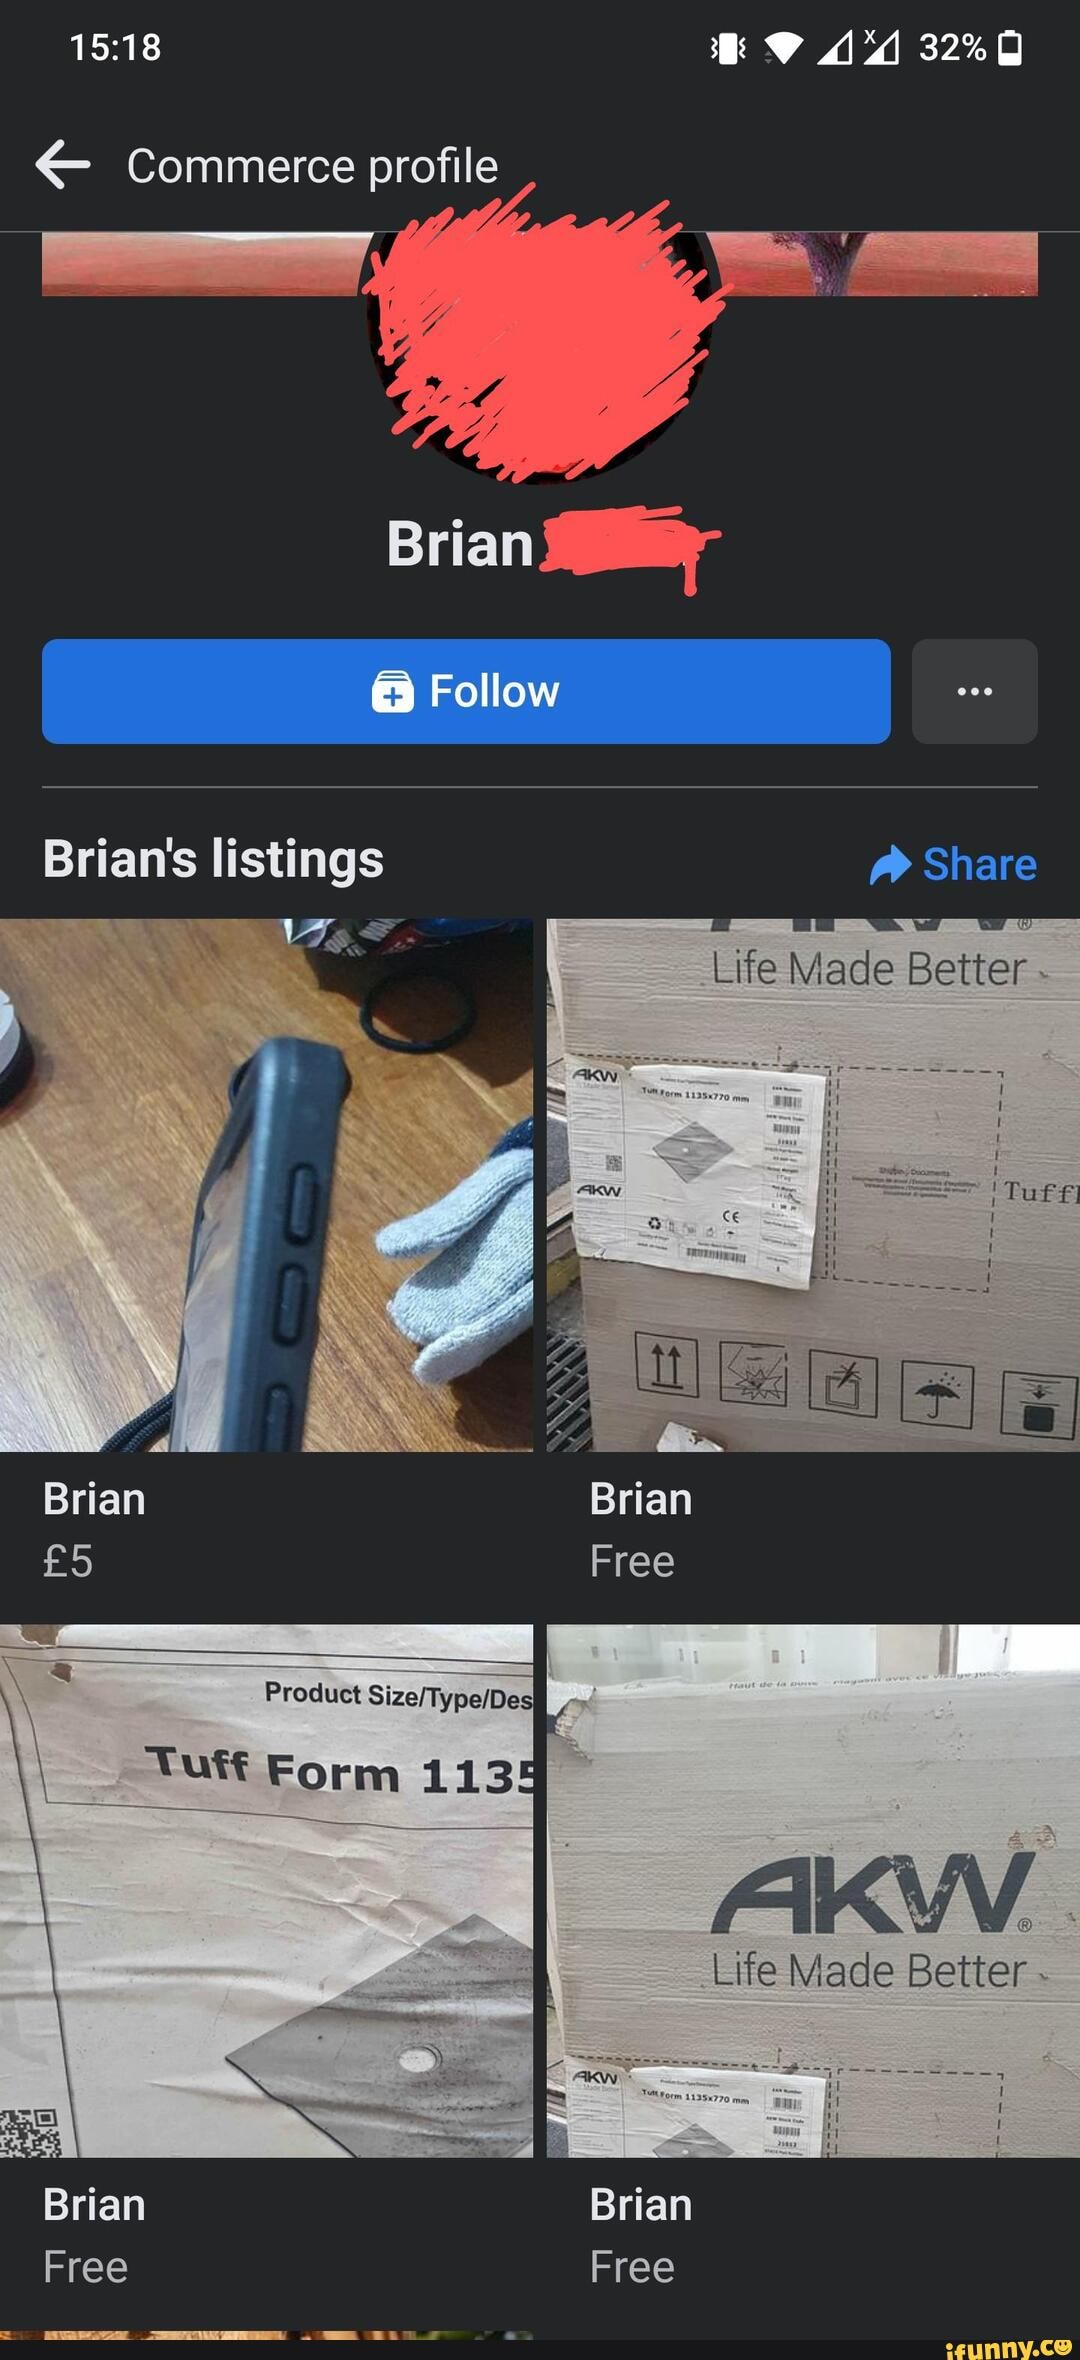 eerste boiler Grof AA Commerce profile Brian Follow Brian's listings Share Life Made Better  Brian Free Product SkzaliypalOes Form Life Made Better Brian Brian Free  Free - )